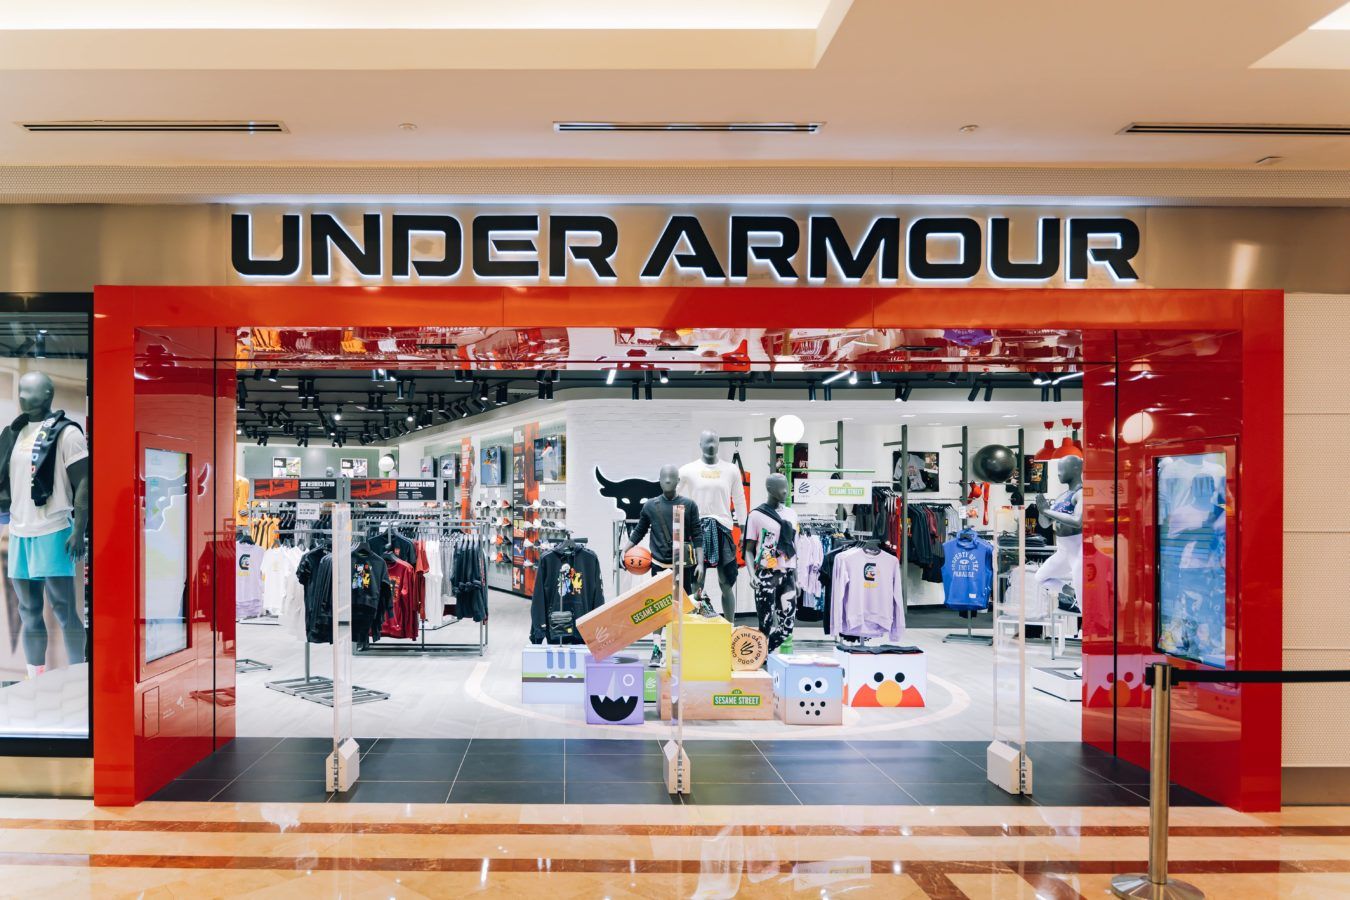 Store Explore: Under Armour’s new concept store in Suria KLCC is its largest in Malaysia